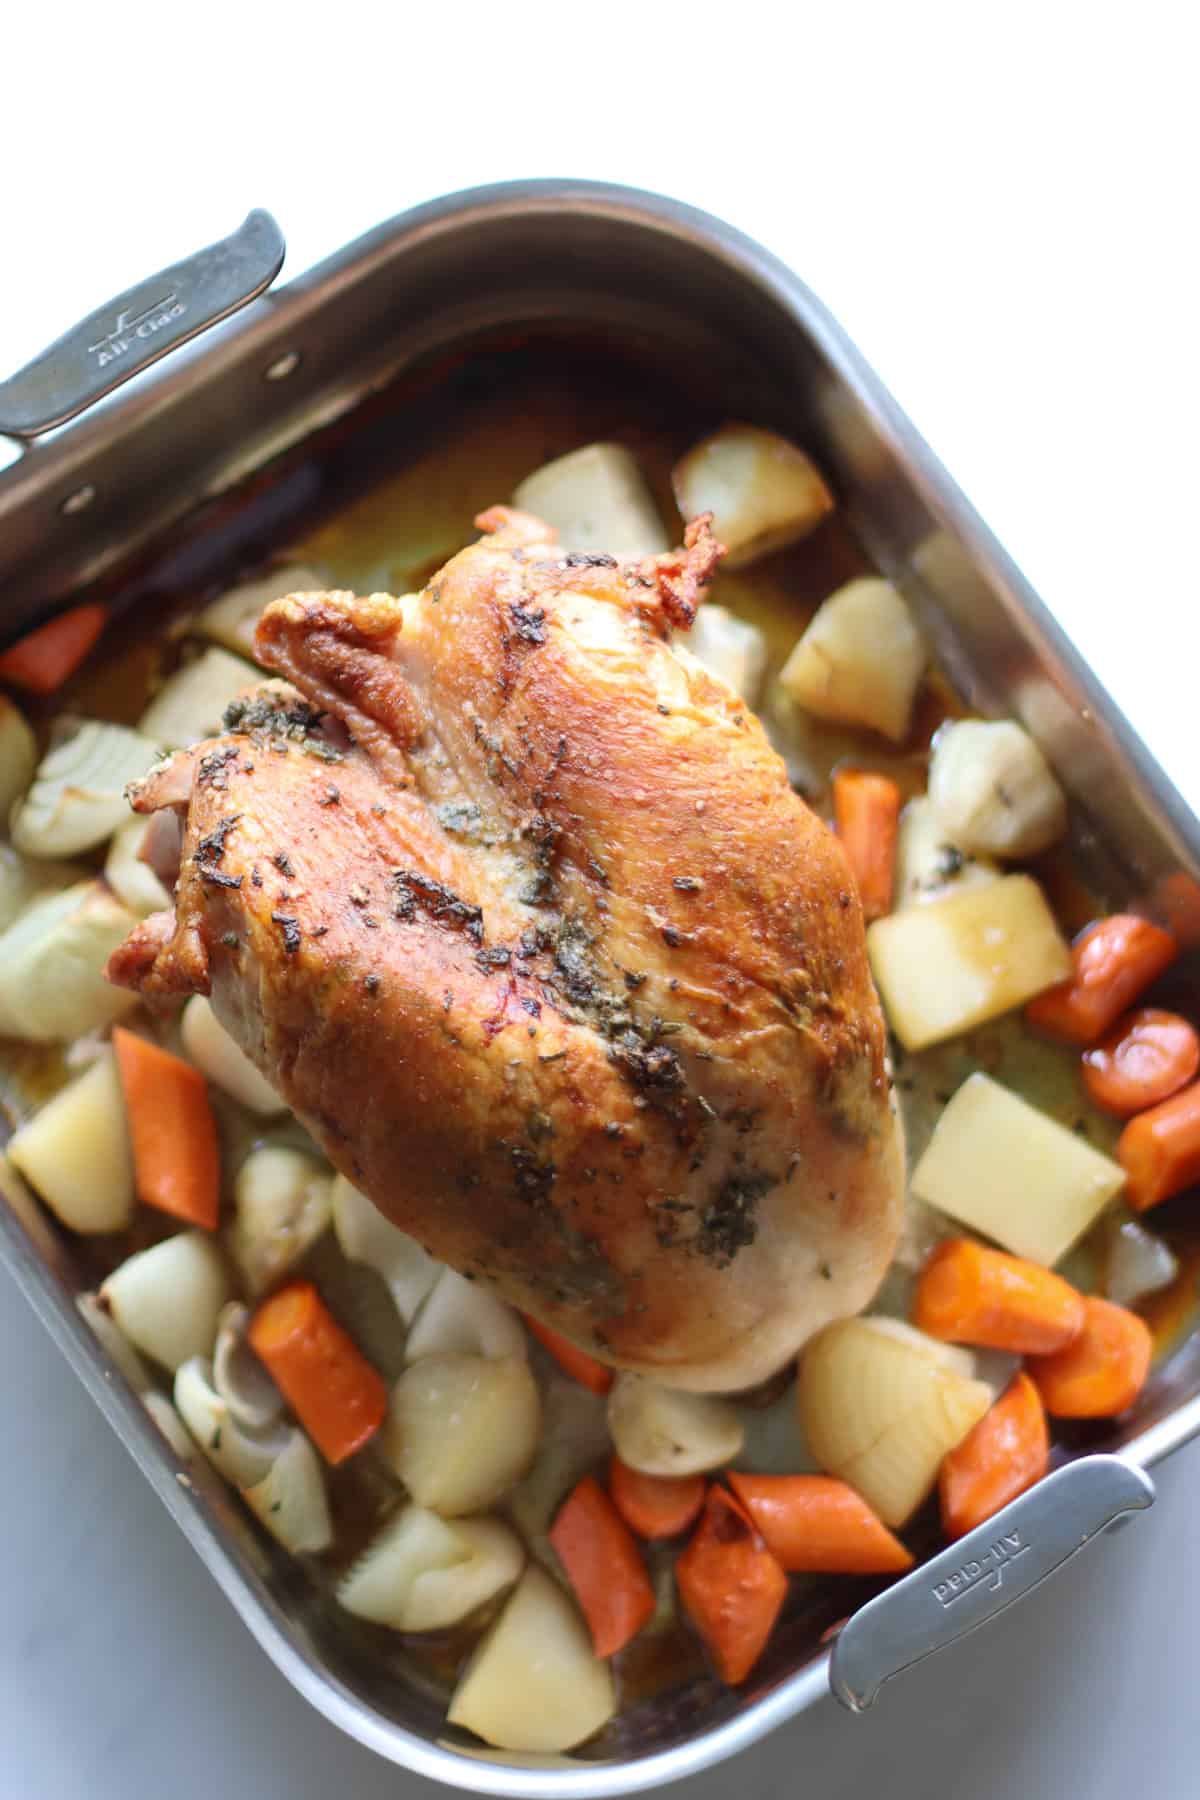 Roasted turkey breast on top of vegetables in a baking pan.